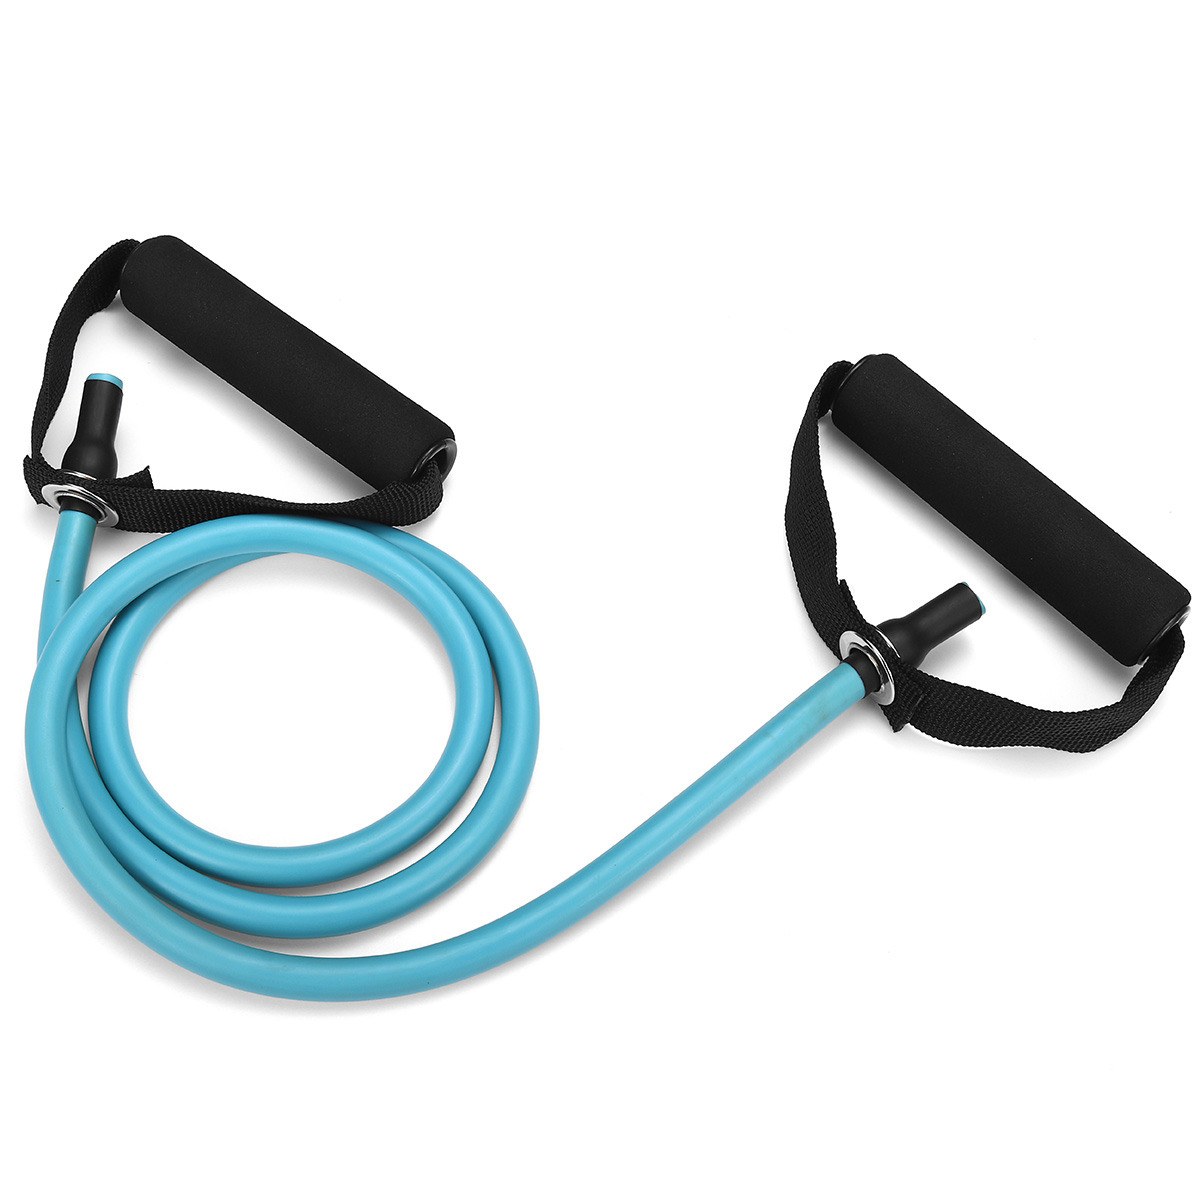 1Pc-10152025303540lbs-Resistance-Bands-Fitness-Muscle-Training-Exercise-Bands-1686632-3